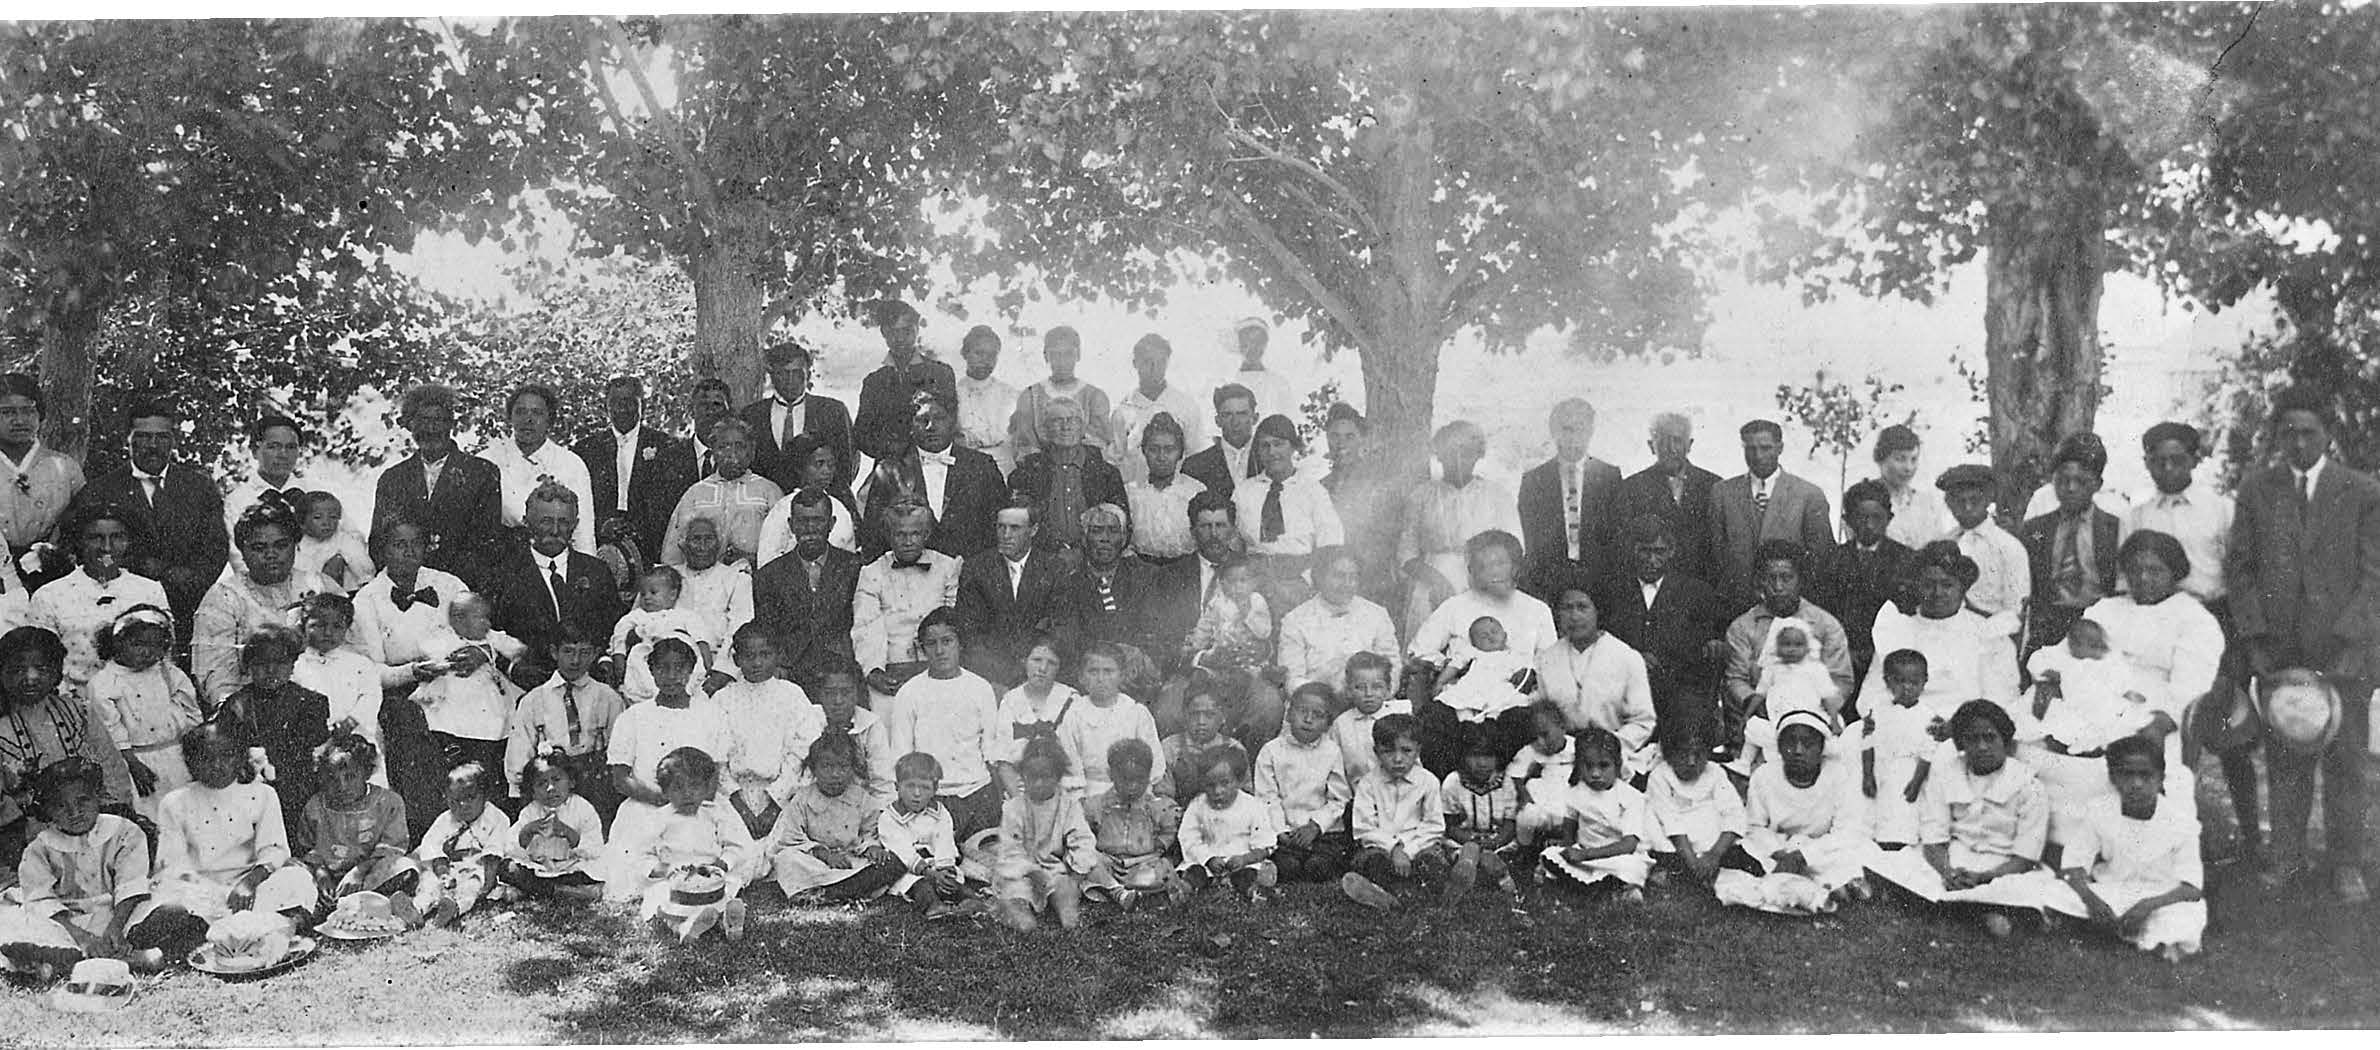 Iosepa Saints circa 1910. Shortly after the temple’s announcement, the prophet personally visited the Polynesian colony at Iosepa, Utah, recommending the Saints return to the islands and assist with the temple. They did so, and the Iosepa Ranch was sold in 1917. Courtesy of BYU–Hawaii Archives.